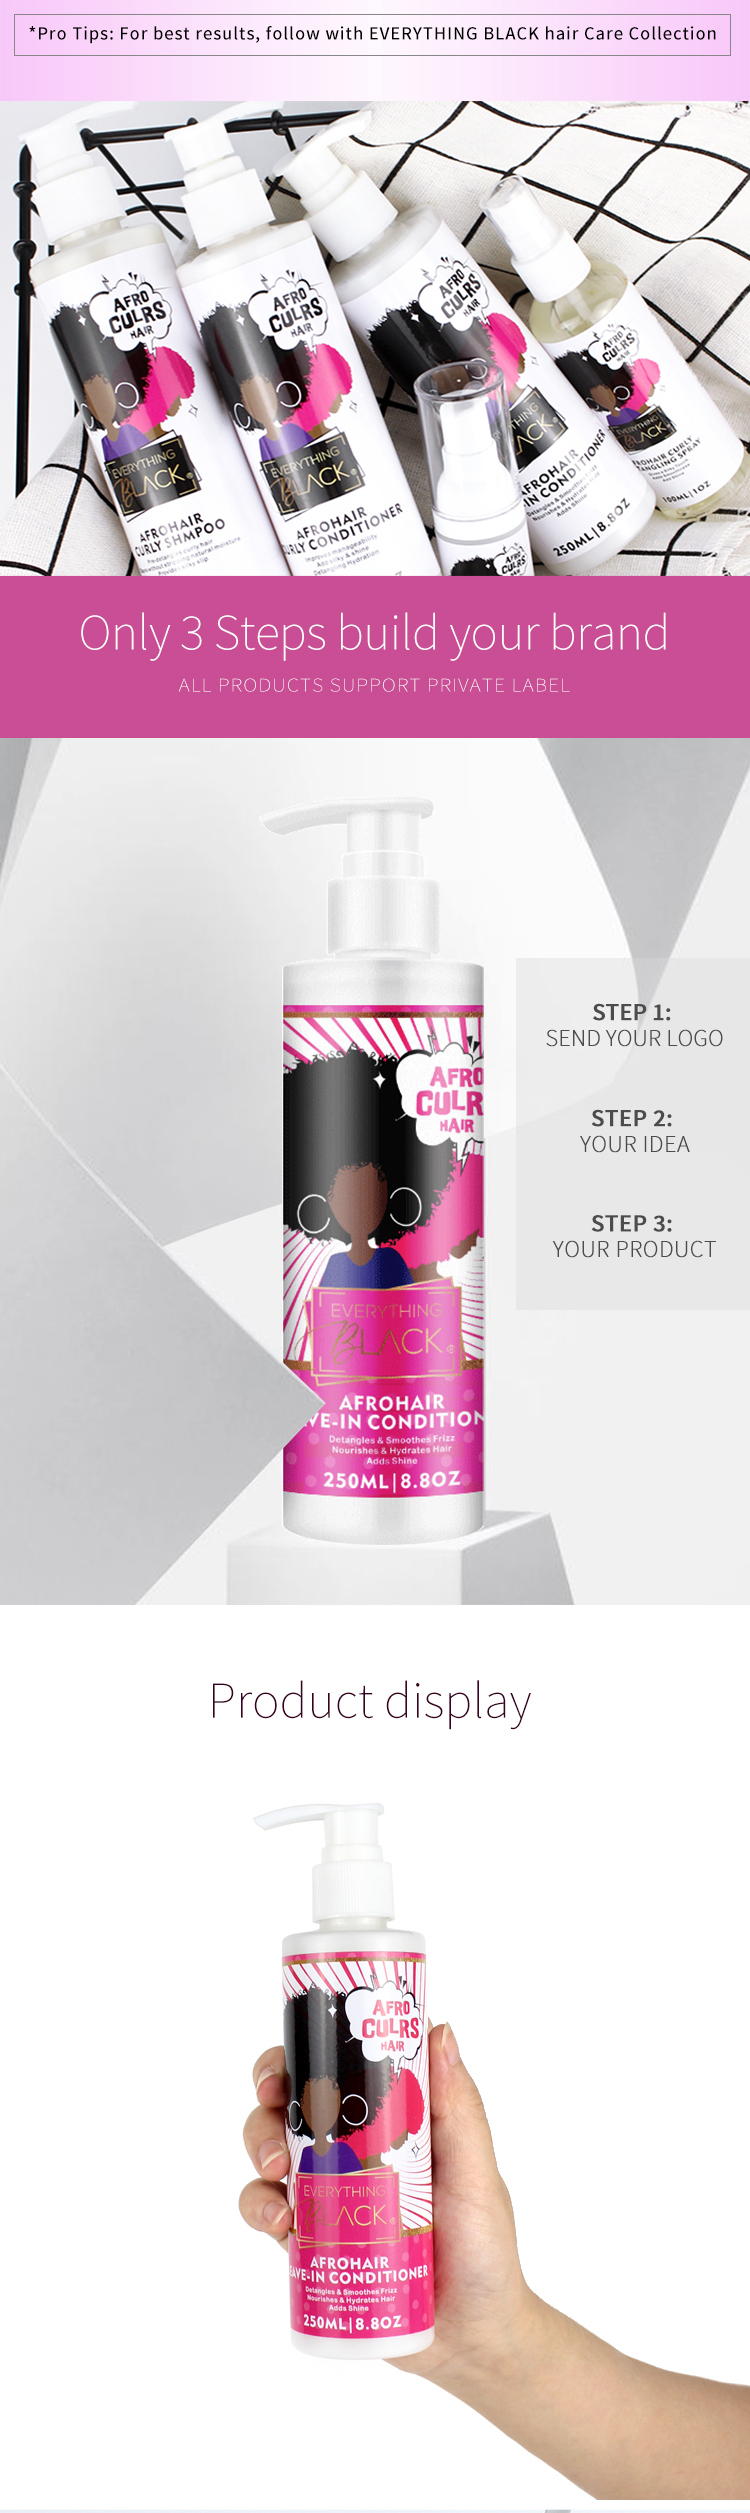 Everythingblack Customize Label Sultfate Free Organic Leave In Conditioner For Curly Hair 